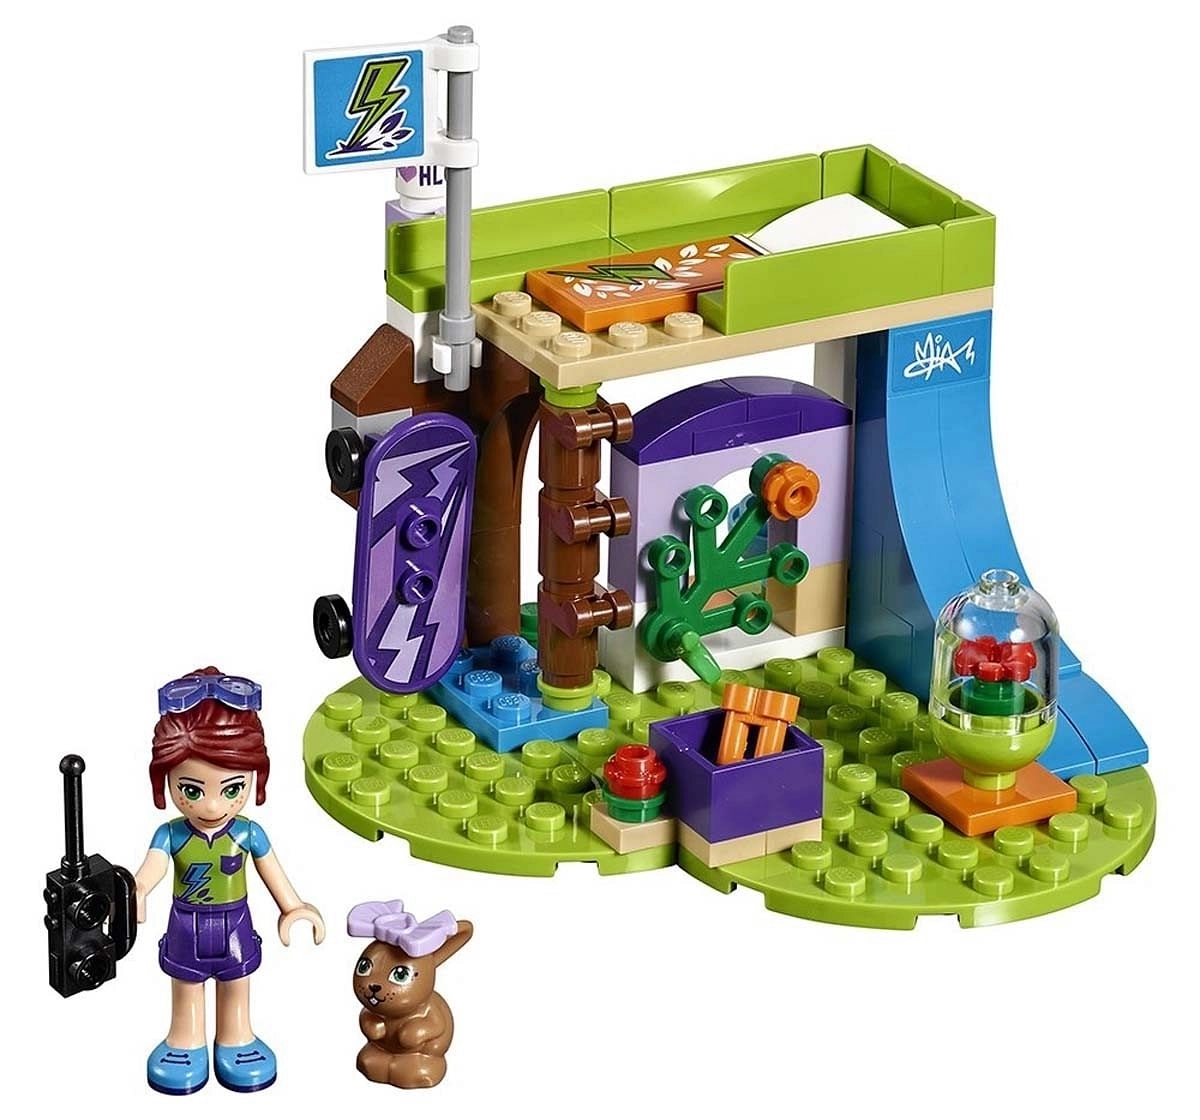 Lego Friends Mia’s Bedroom Building  With Tree House (86 Pcs)41327  Blocks for age 6Y+ 